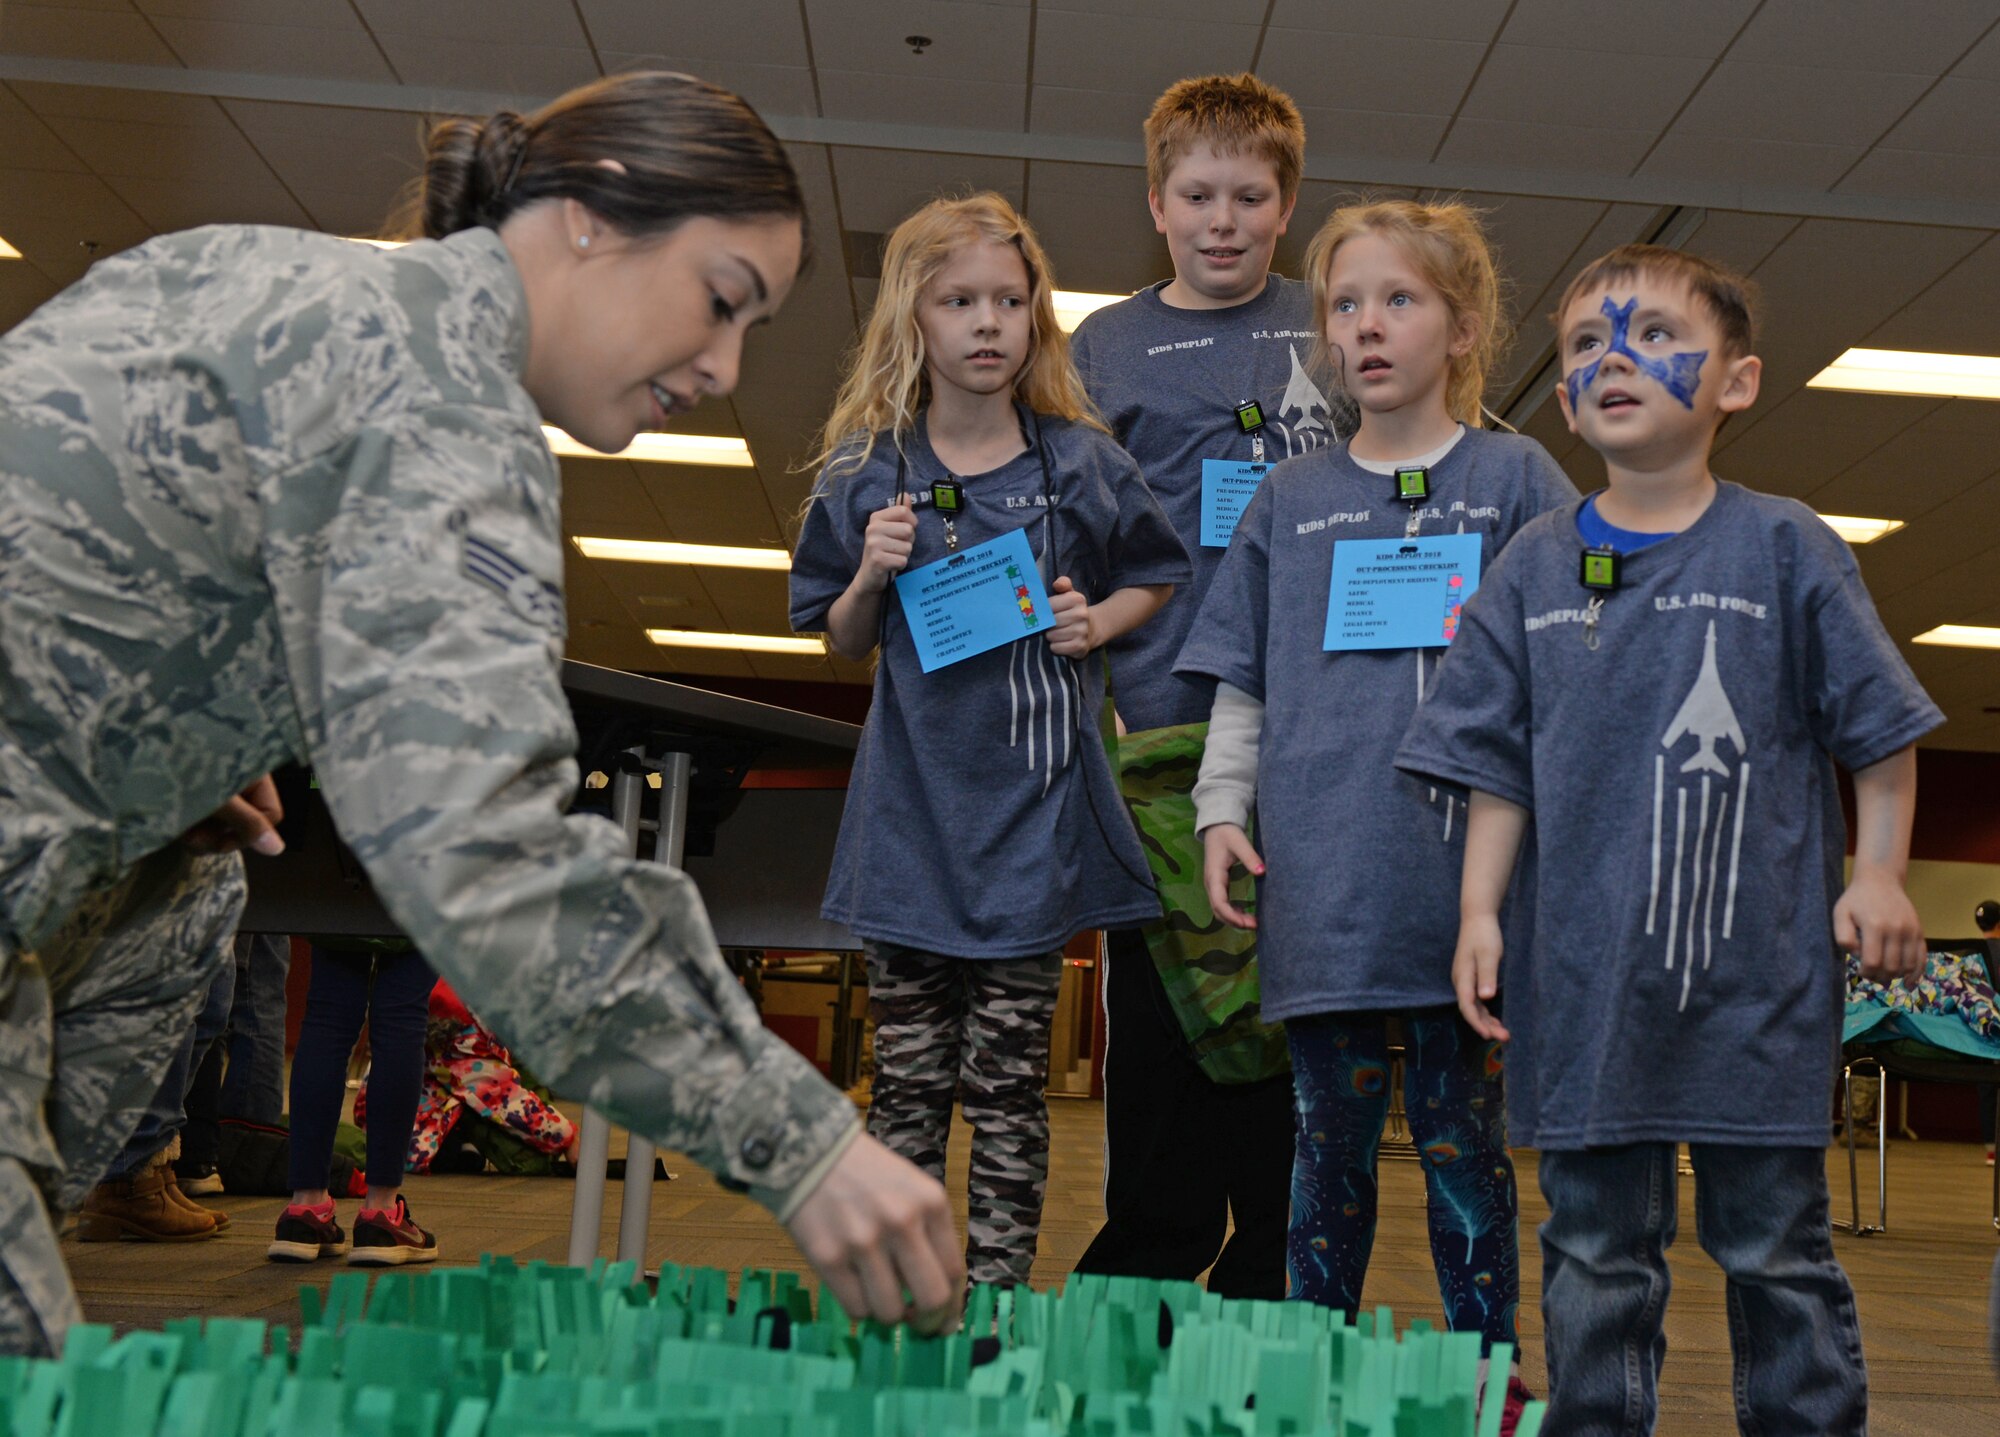 Children are given instructions for a game during a kids deployment line at Ellsworth Air Force Base, S.D., April 7, 2018.  One hundred children participated in the deployment line celebrating Month of the Military Child. (U.S. Air Force photo by Airman 1st Class Nicolas Z. Erwin)